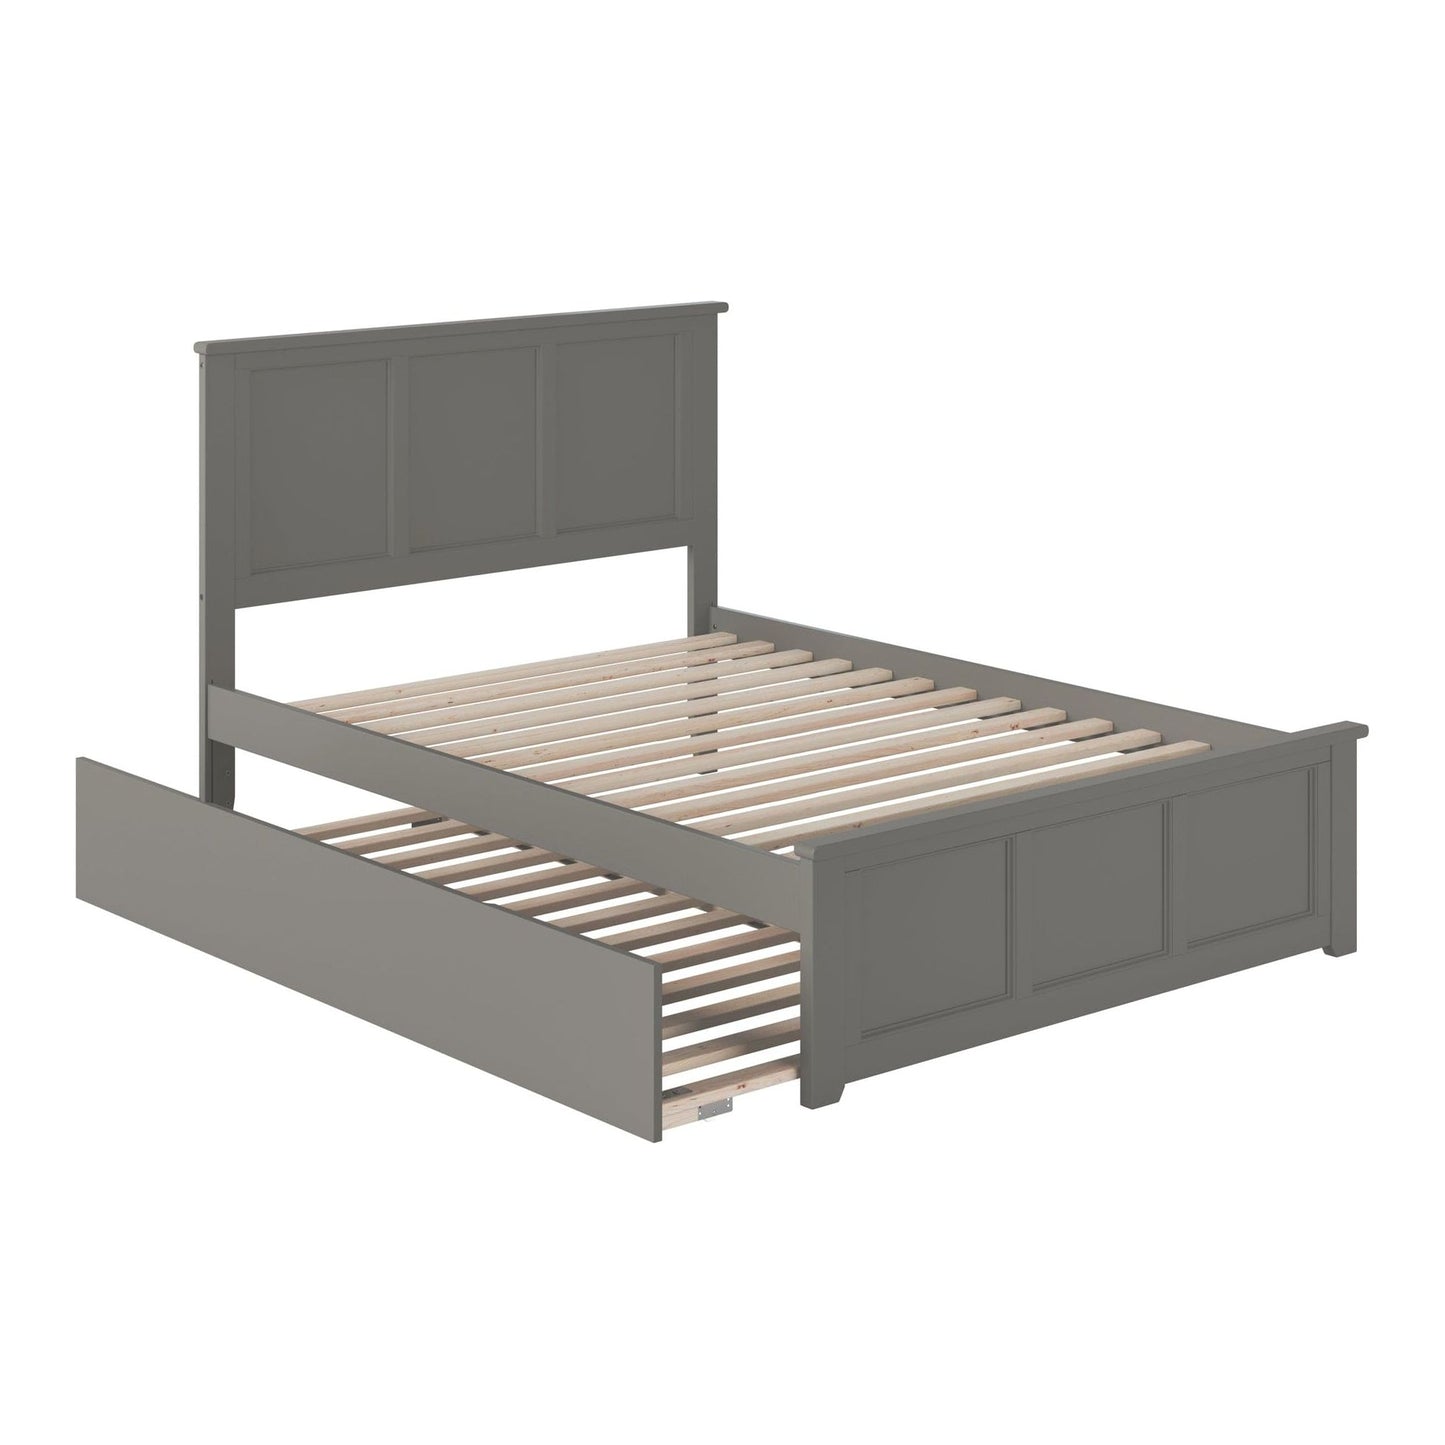 AFI Furnishings Madison Full Platform Bed with Matching Footboard with Twin Size Urban Trundle Bed Grey AR8636019